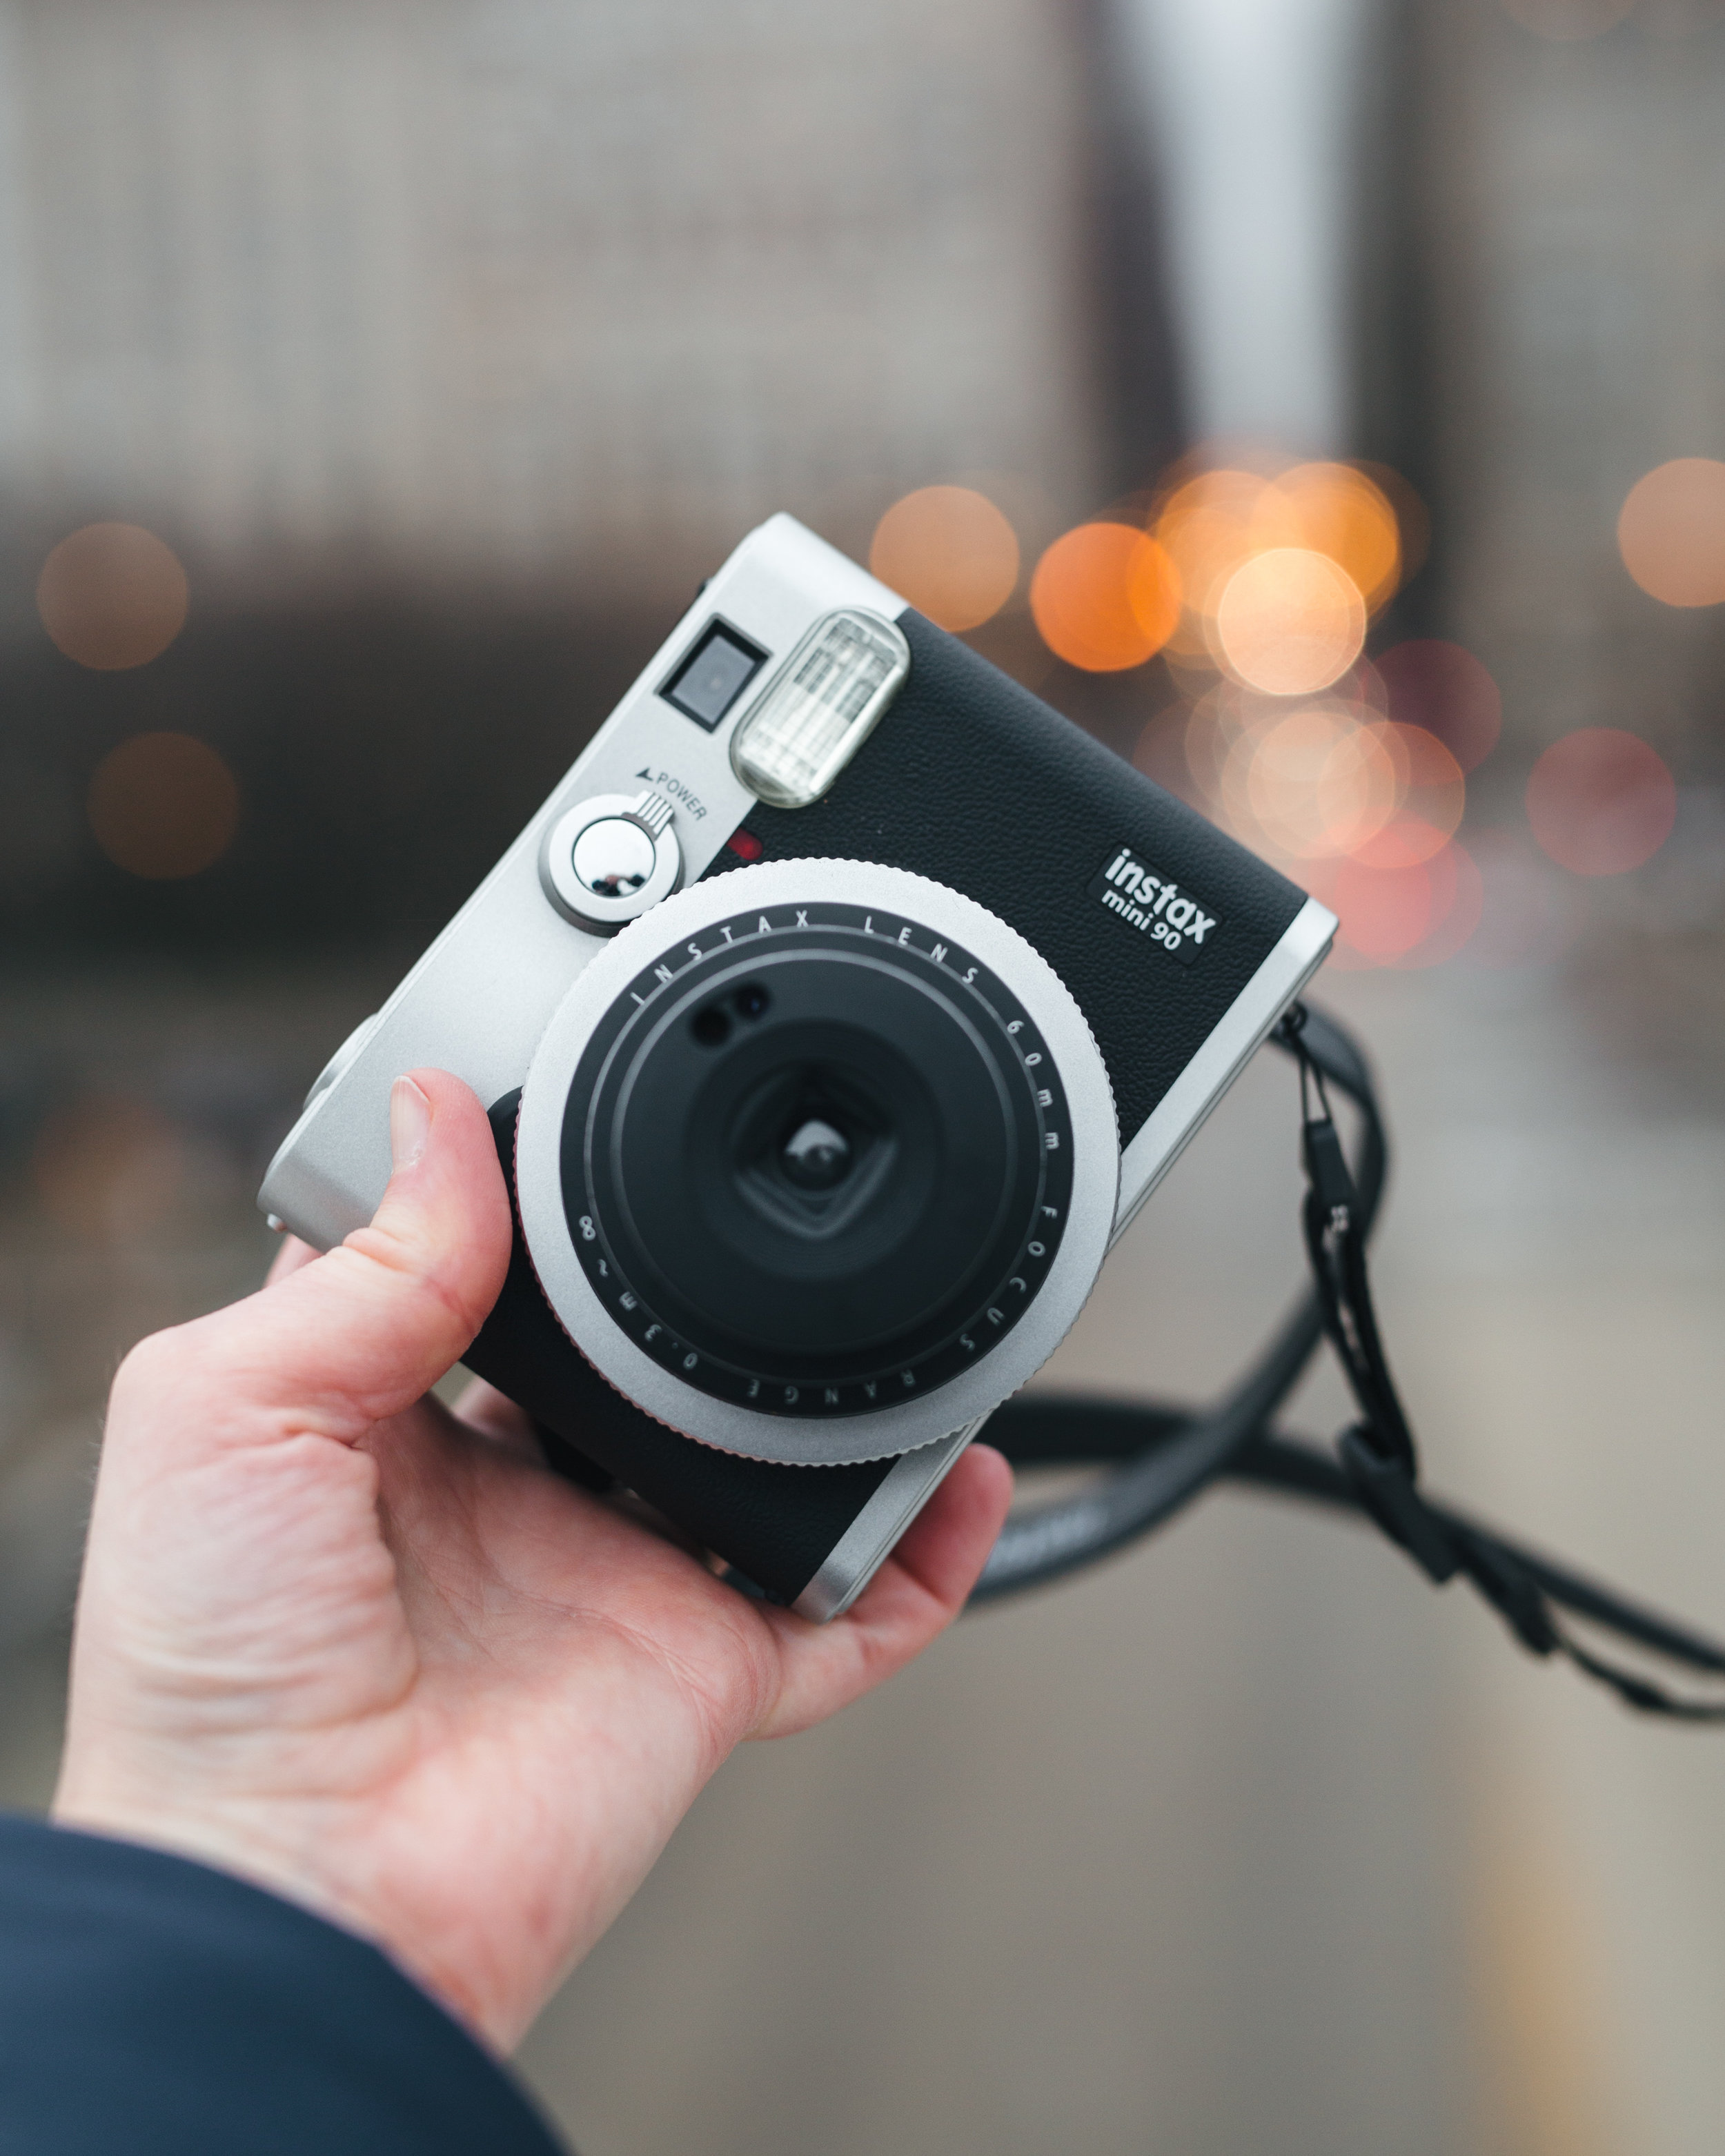 Fujifilm Instax Cameras: What You Need to Know to Get Started